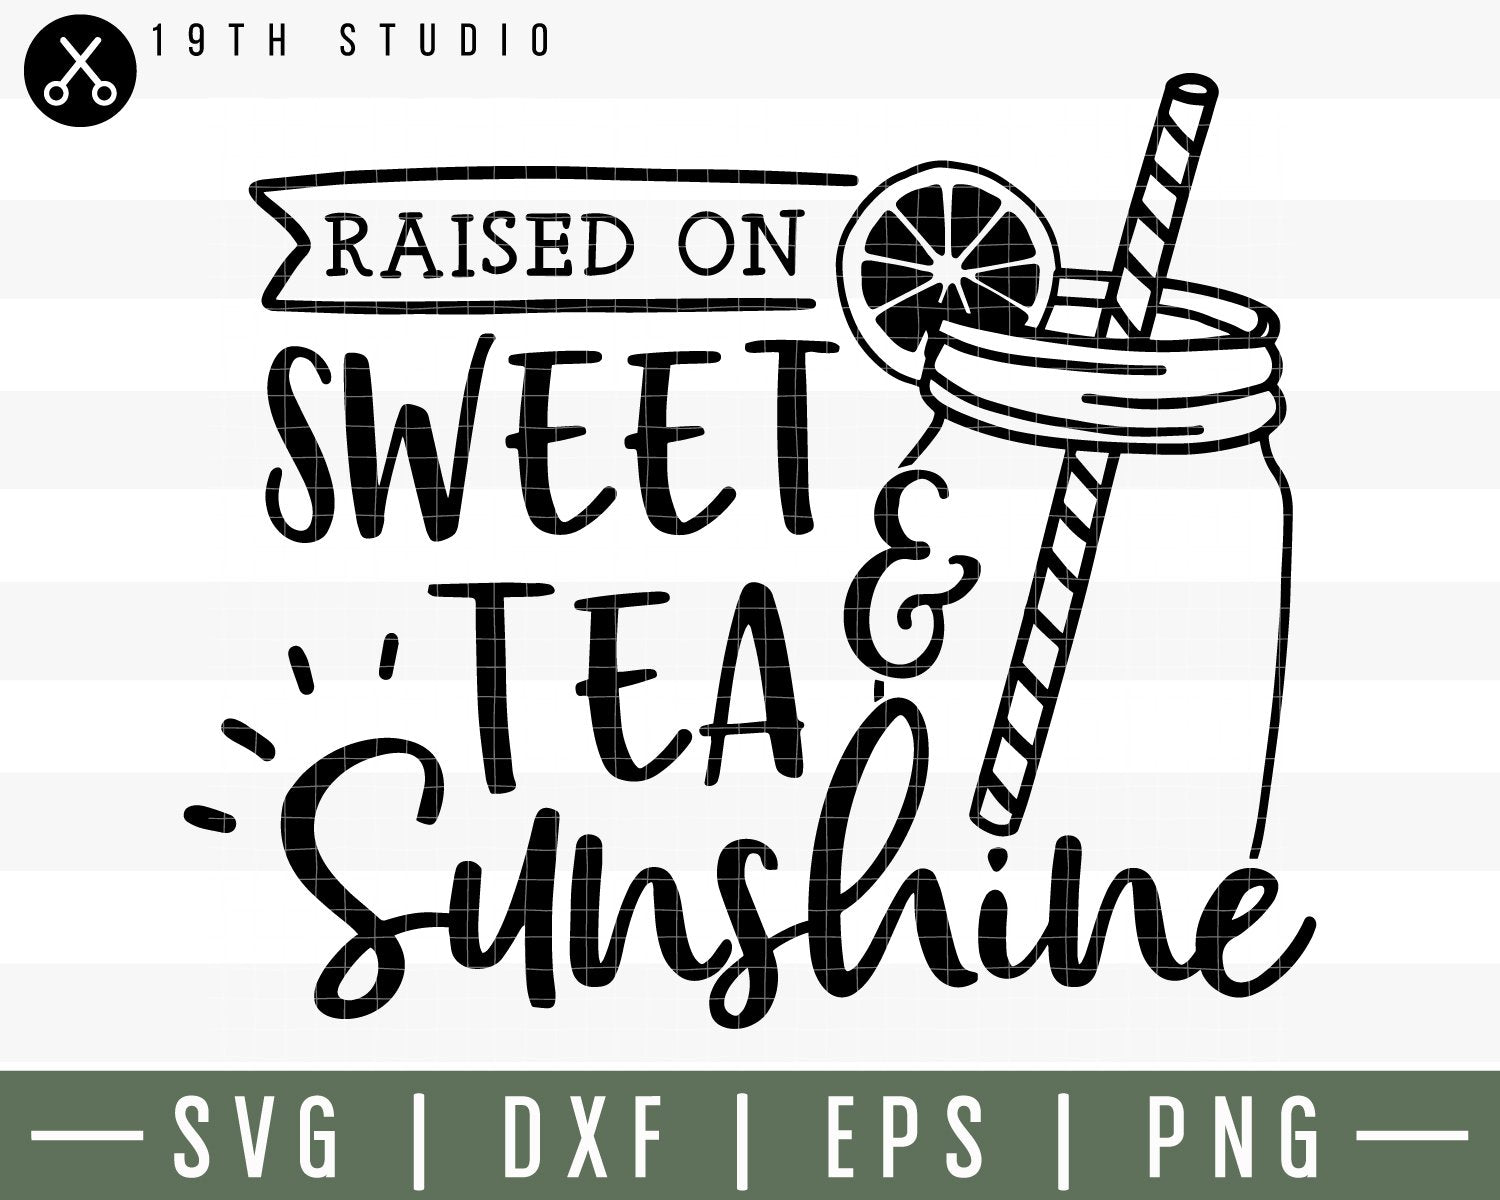 Raised on sweet tea and sunshine SVG | M30F12 Craft House SVG - SVG files for Cricut and Silhouette